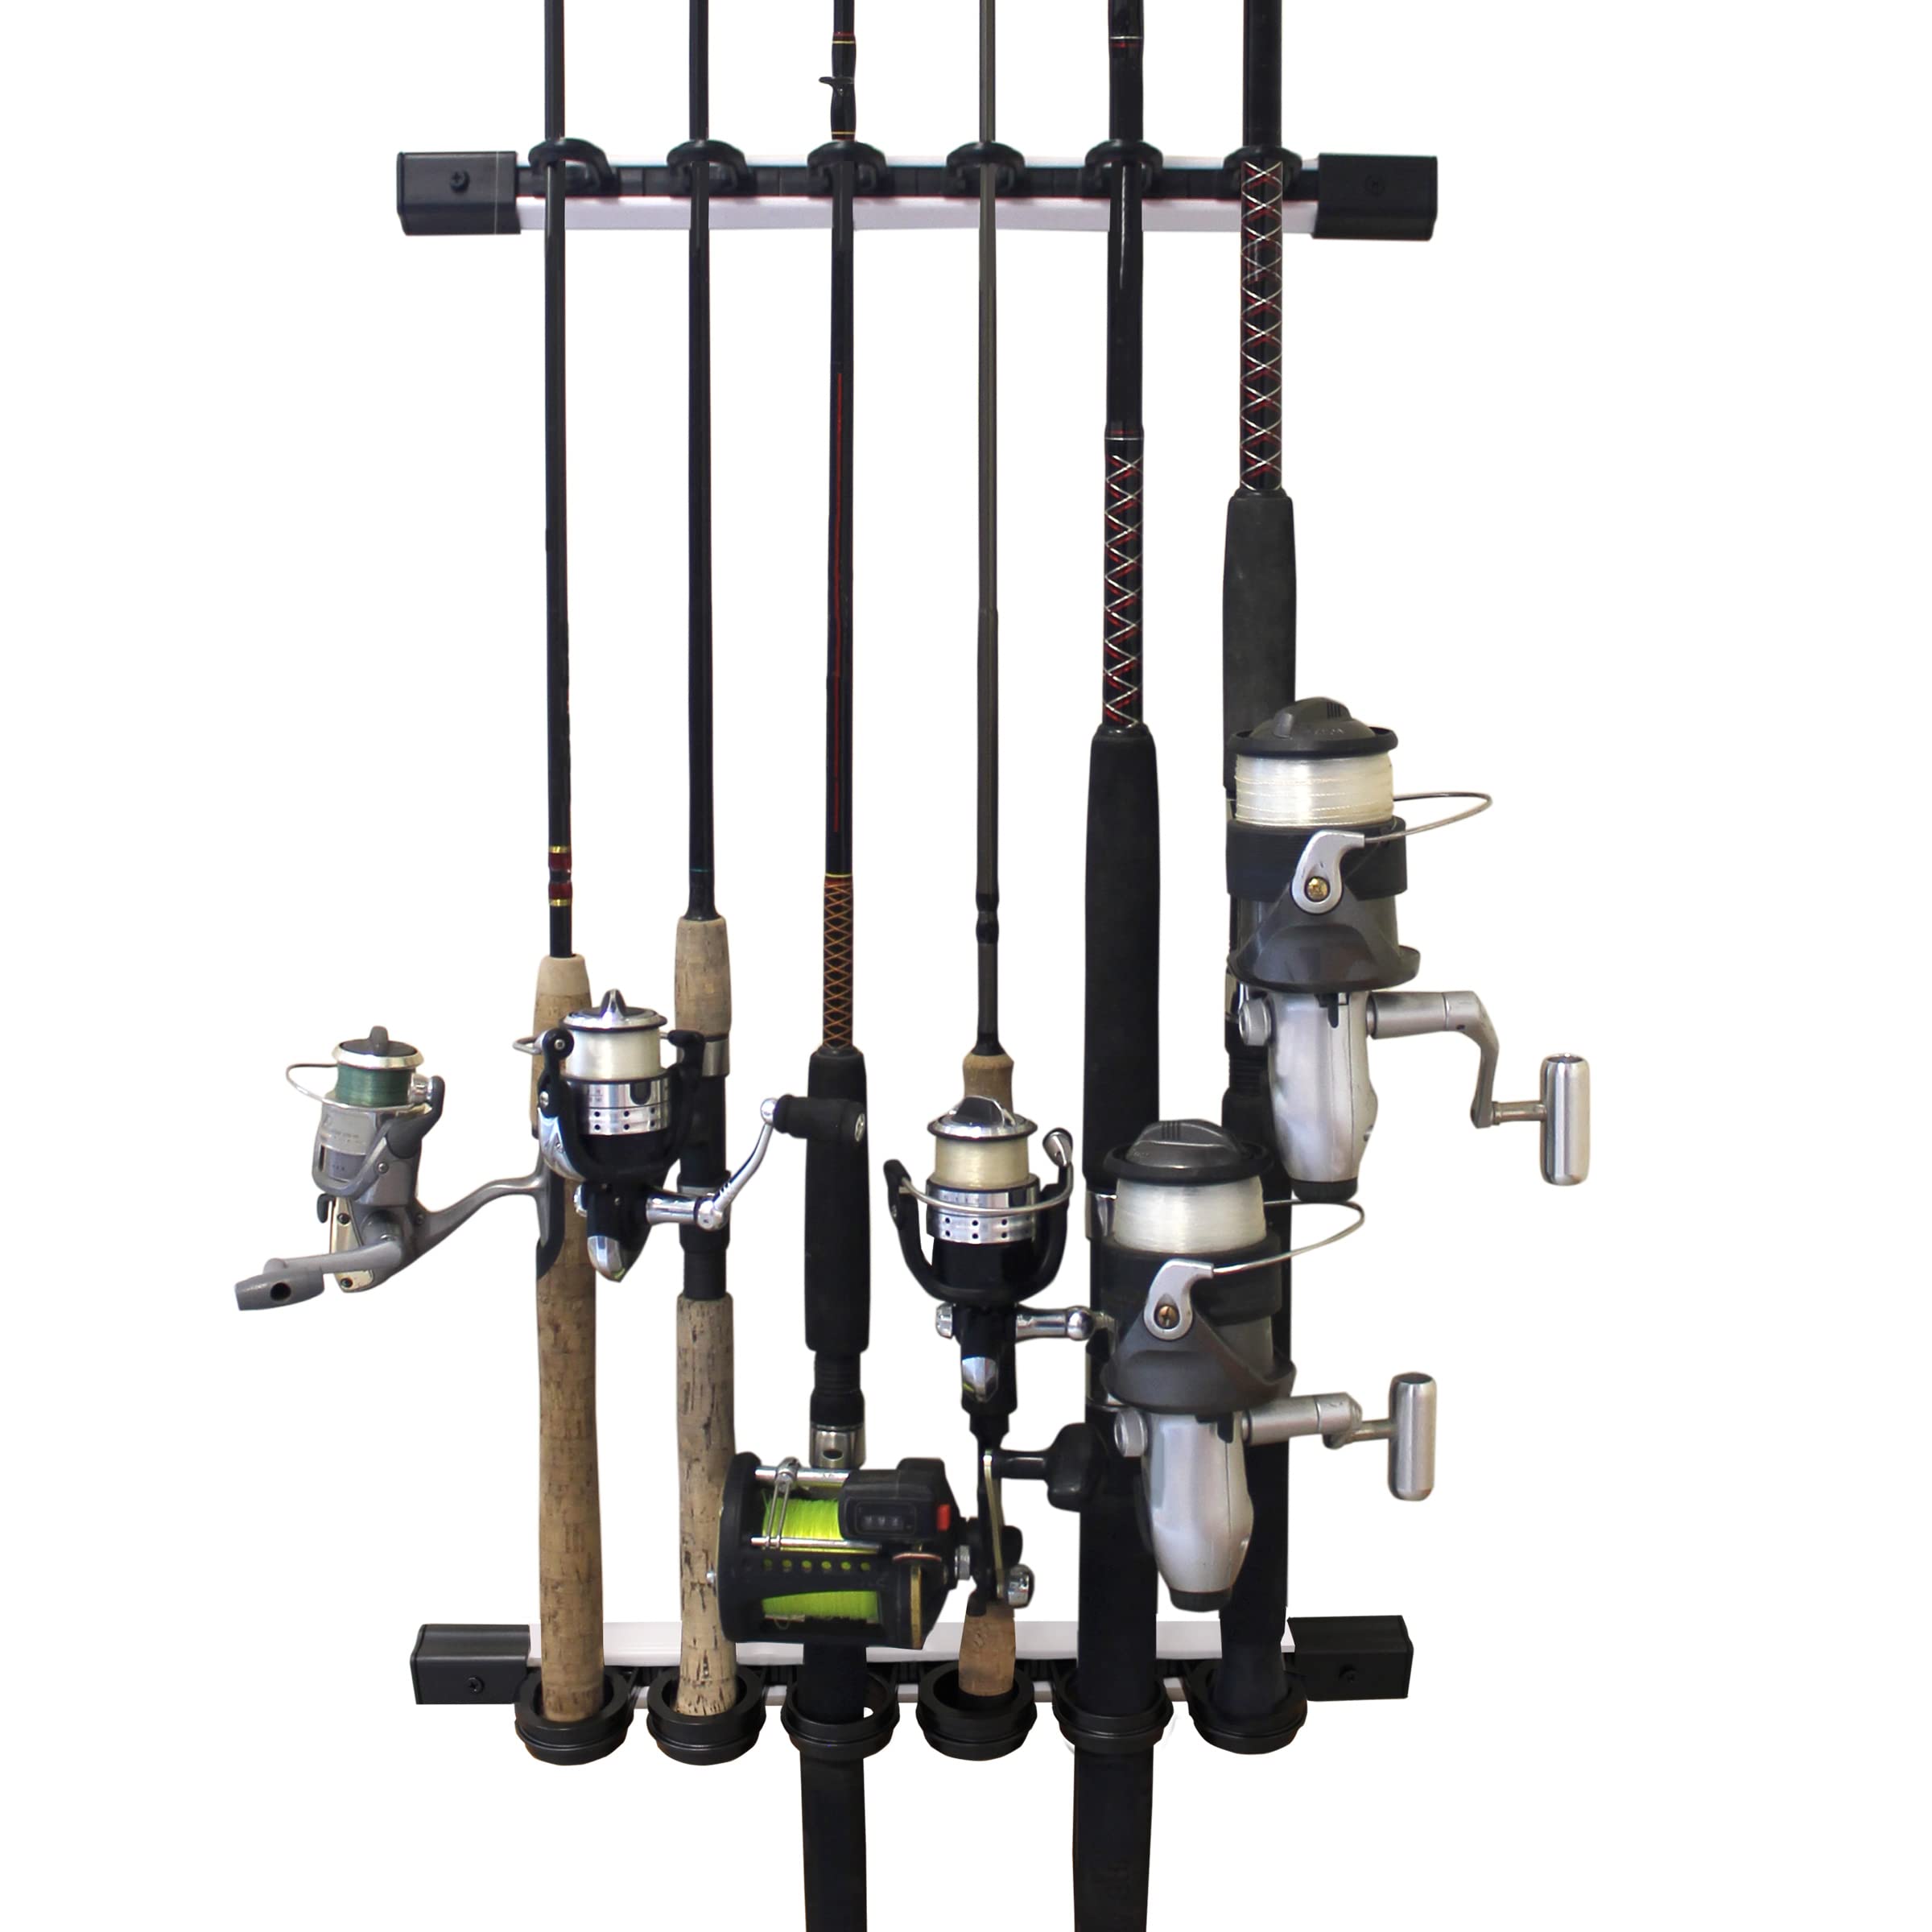 6 Rod Holder Rush Creek Creations All Weather Fishing Rod Storage Wall, Ceiling, or Garage. Rack $13.55 + Free Ship w/Prime $25 or $35+